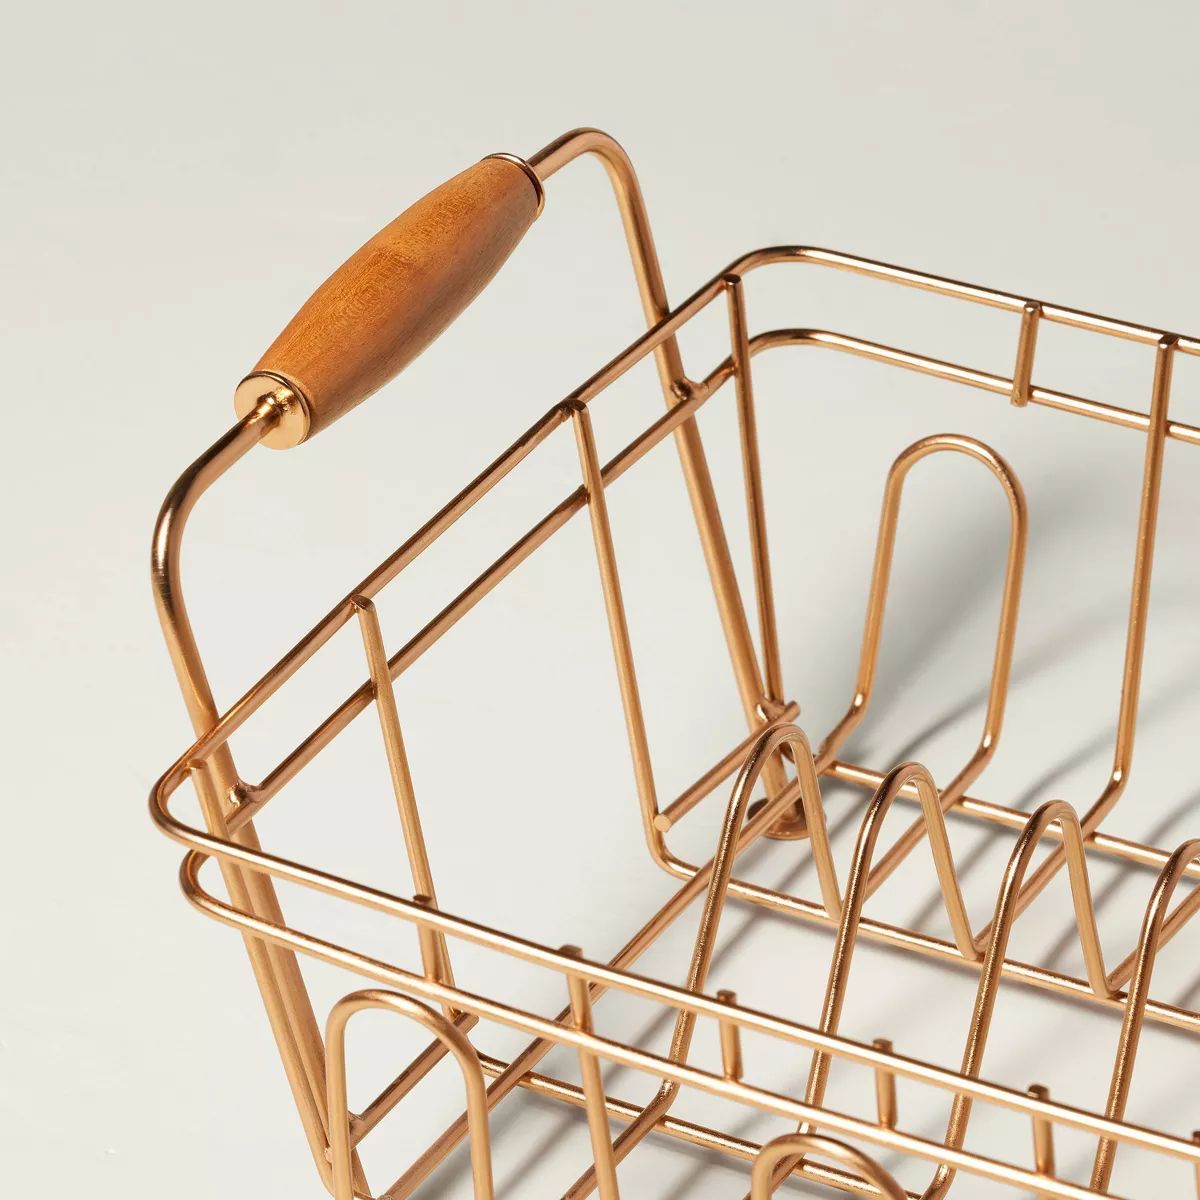 Metal Drying Rack Copper Finish - Hearth & Hand™ with Magnolia | Target